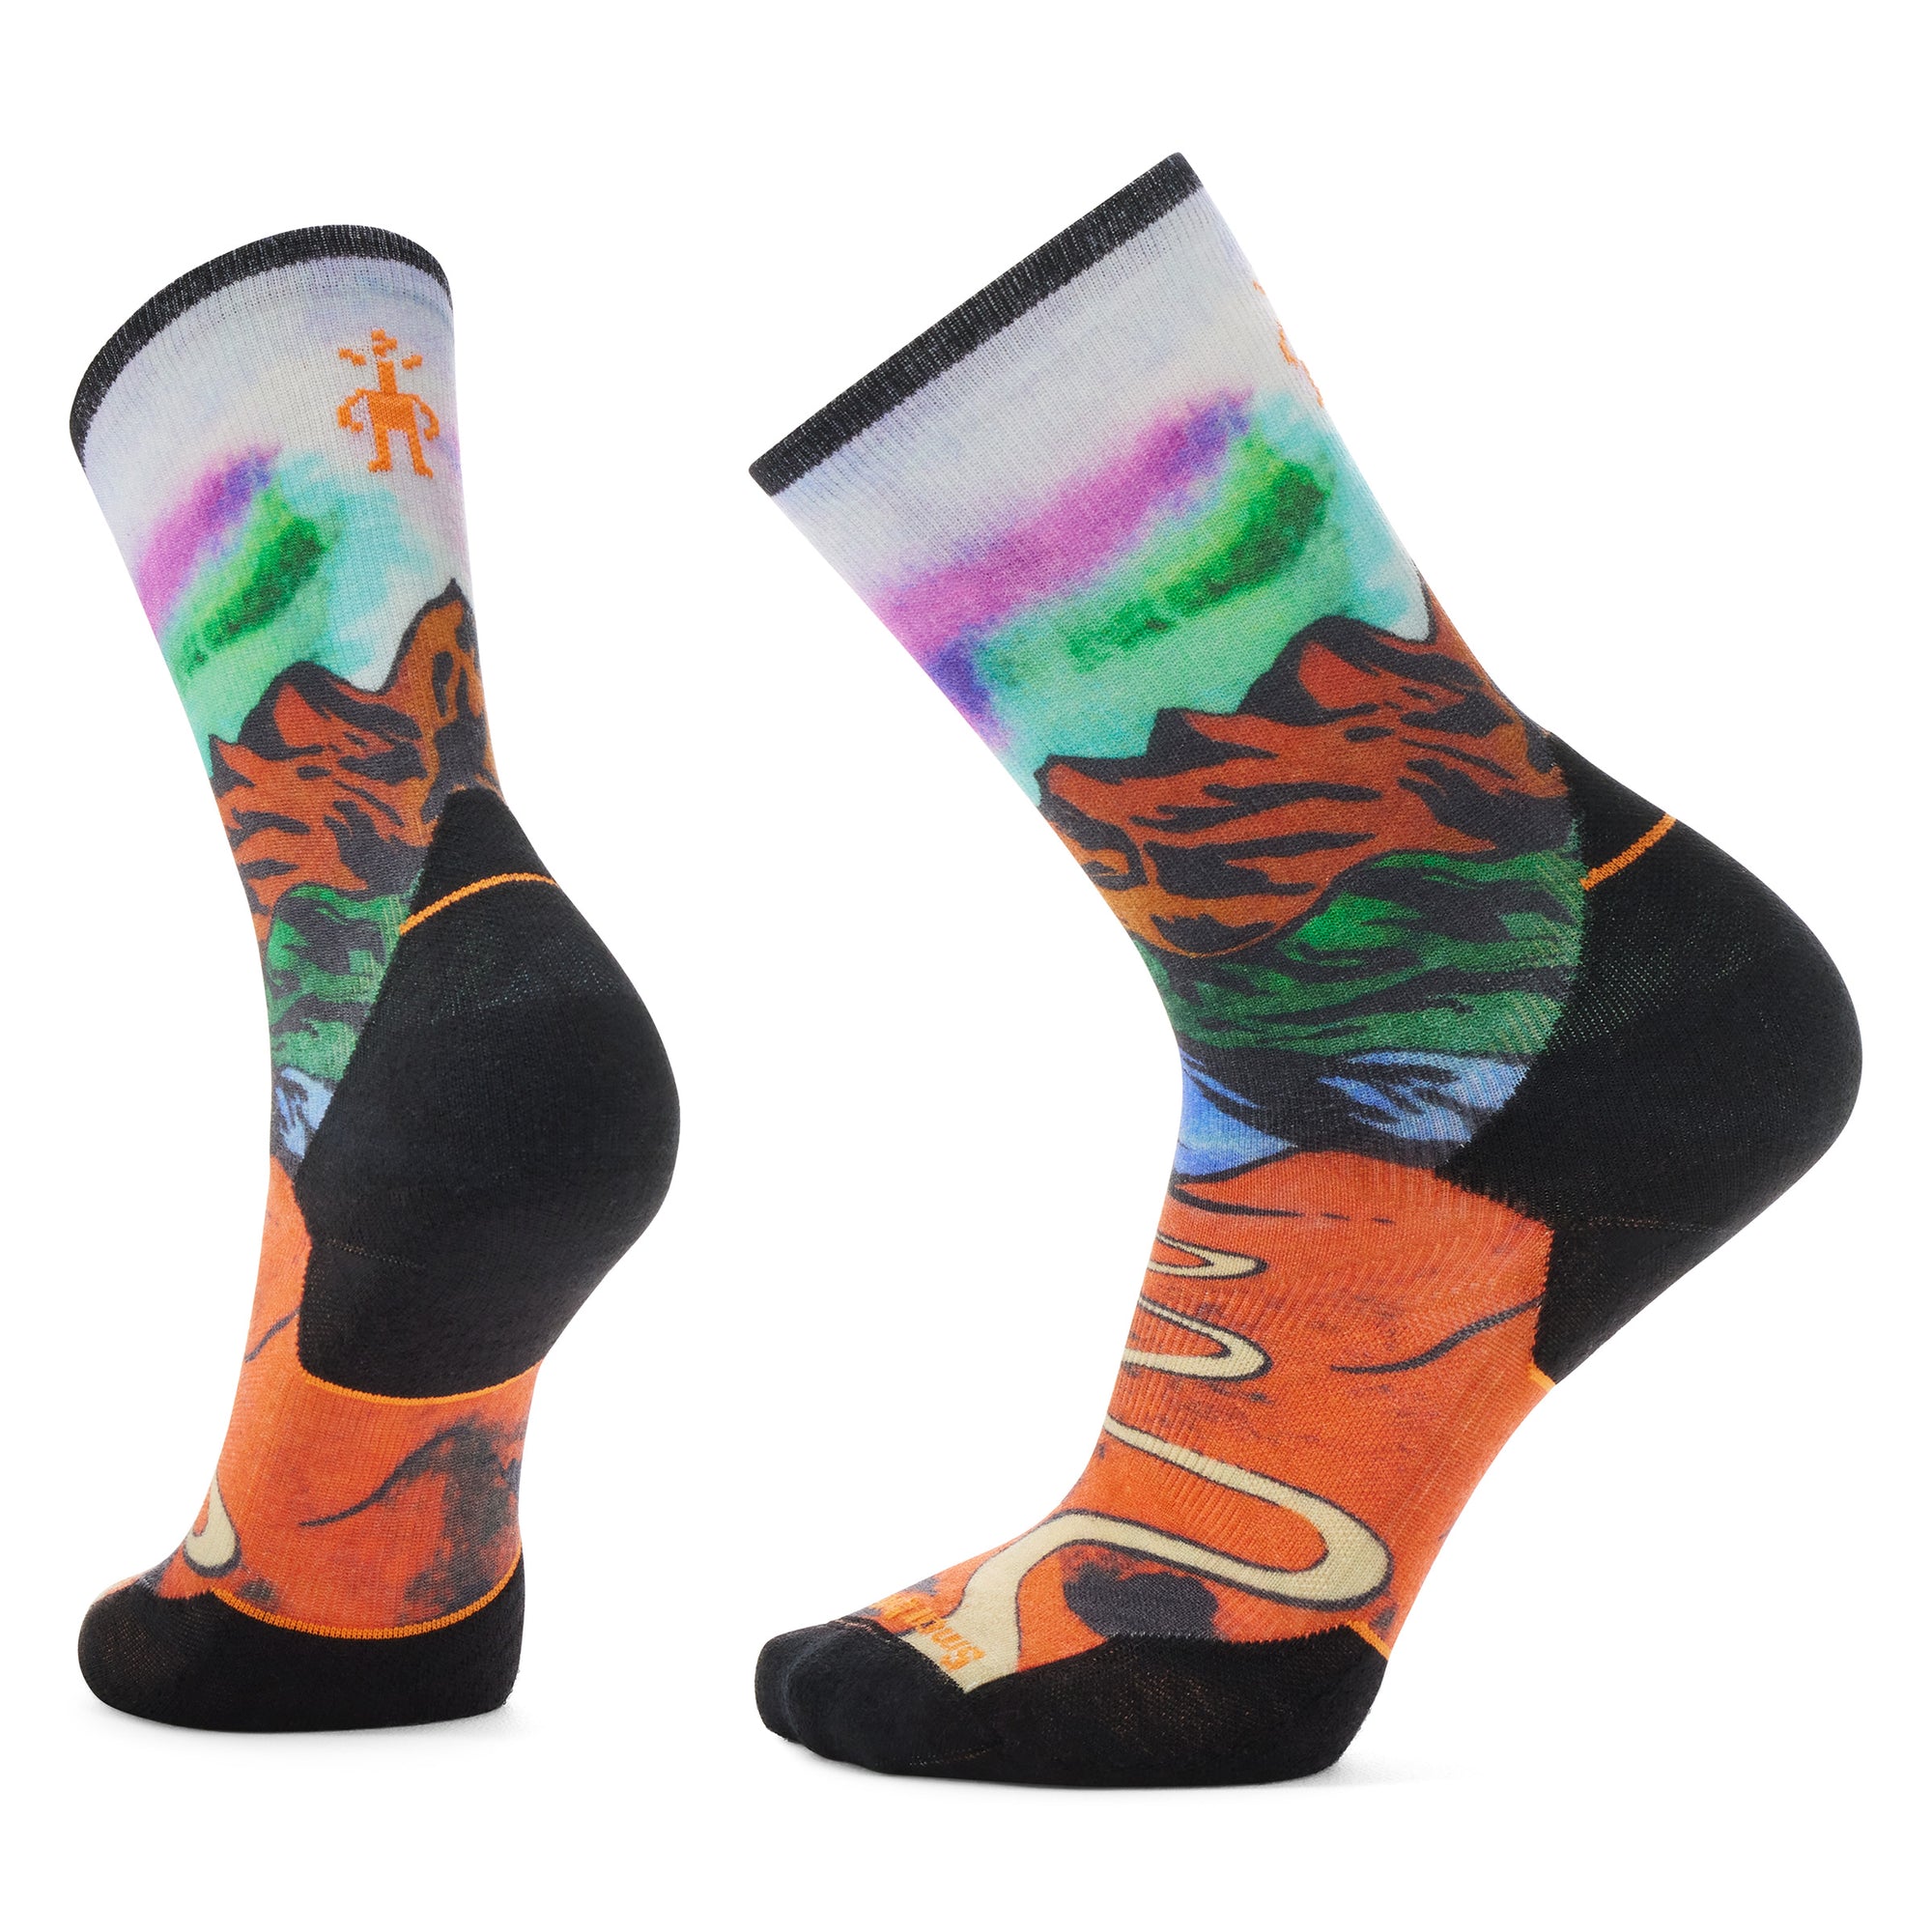 SMARTWOOL TARGETED CUSHION SOCK WITH SINGLETRACK PRINT - UNISEX